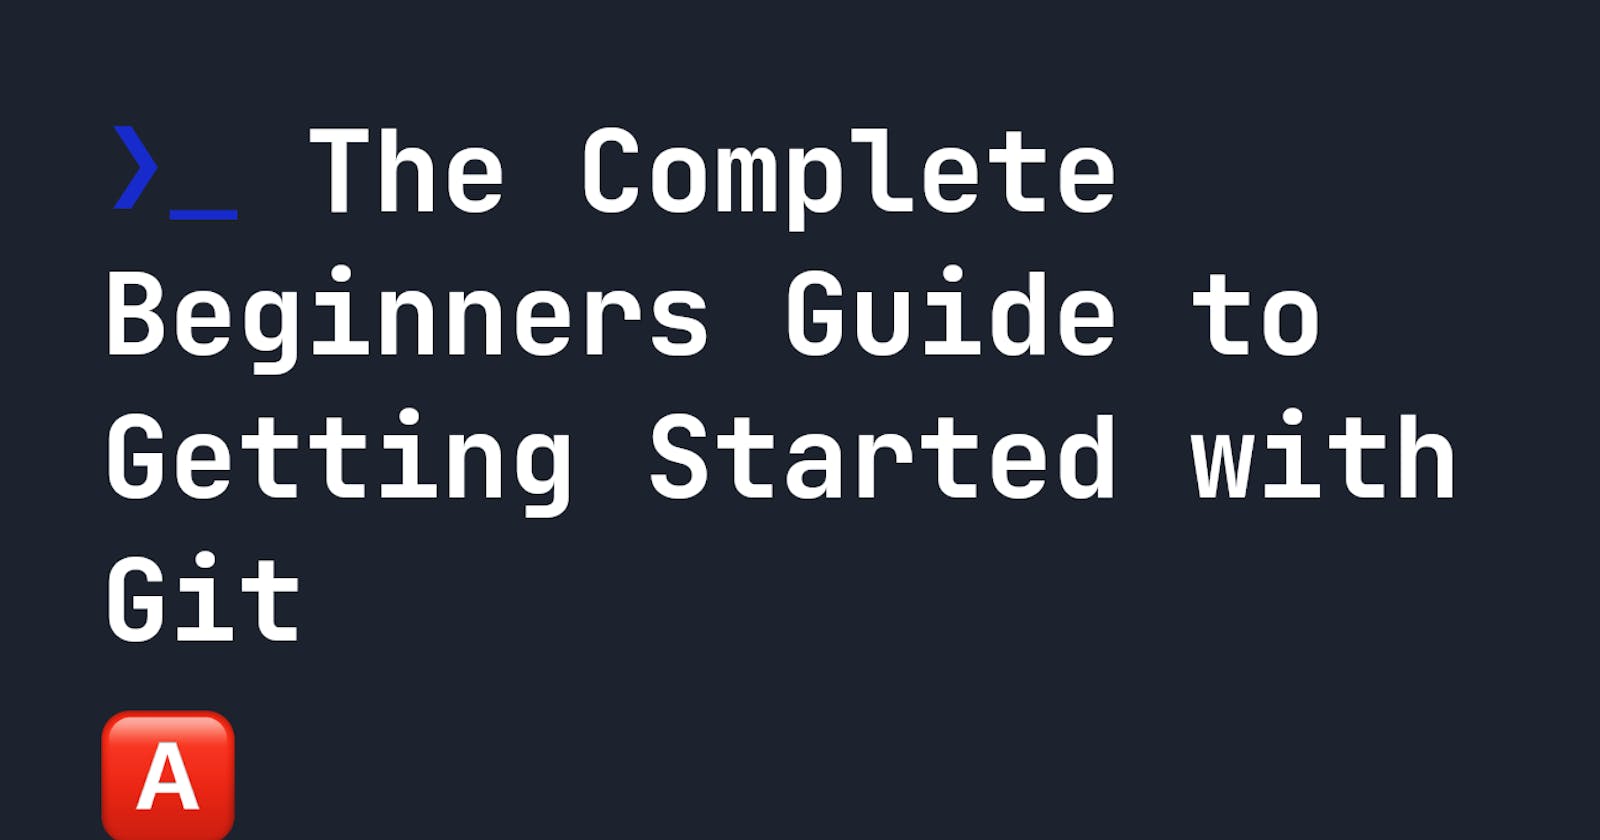 The Complete Beginners Guide to Getting Started with Git